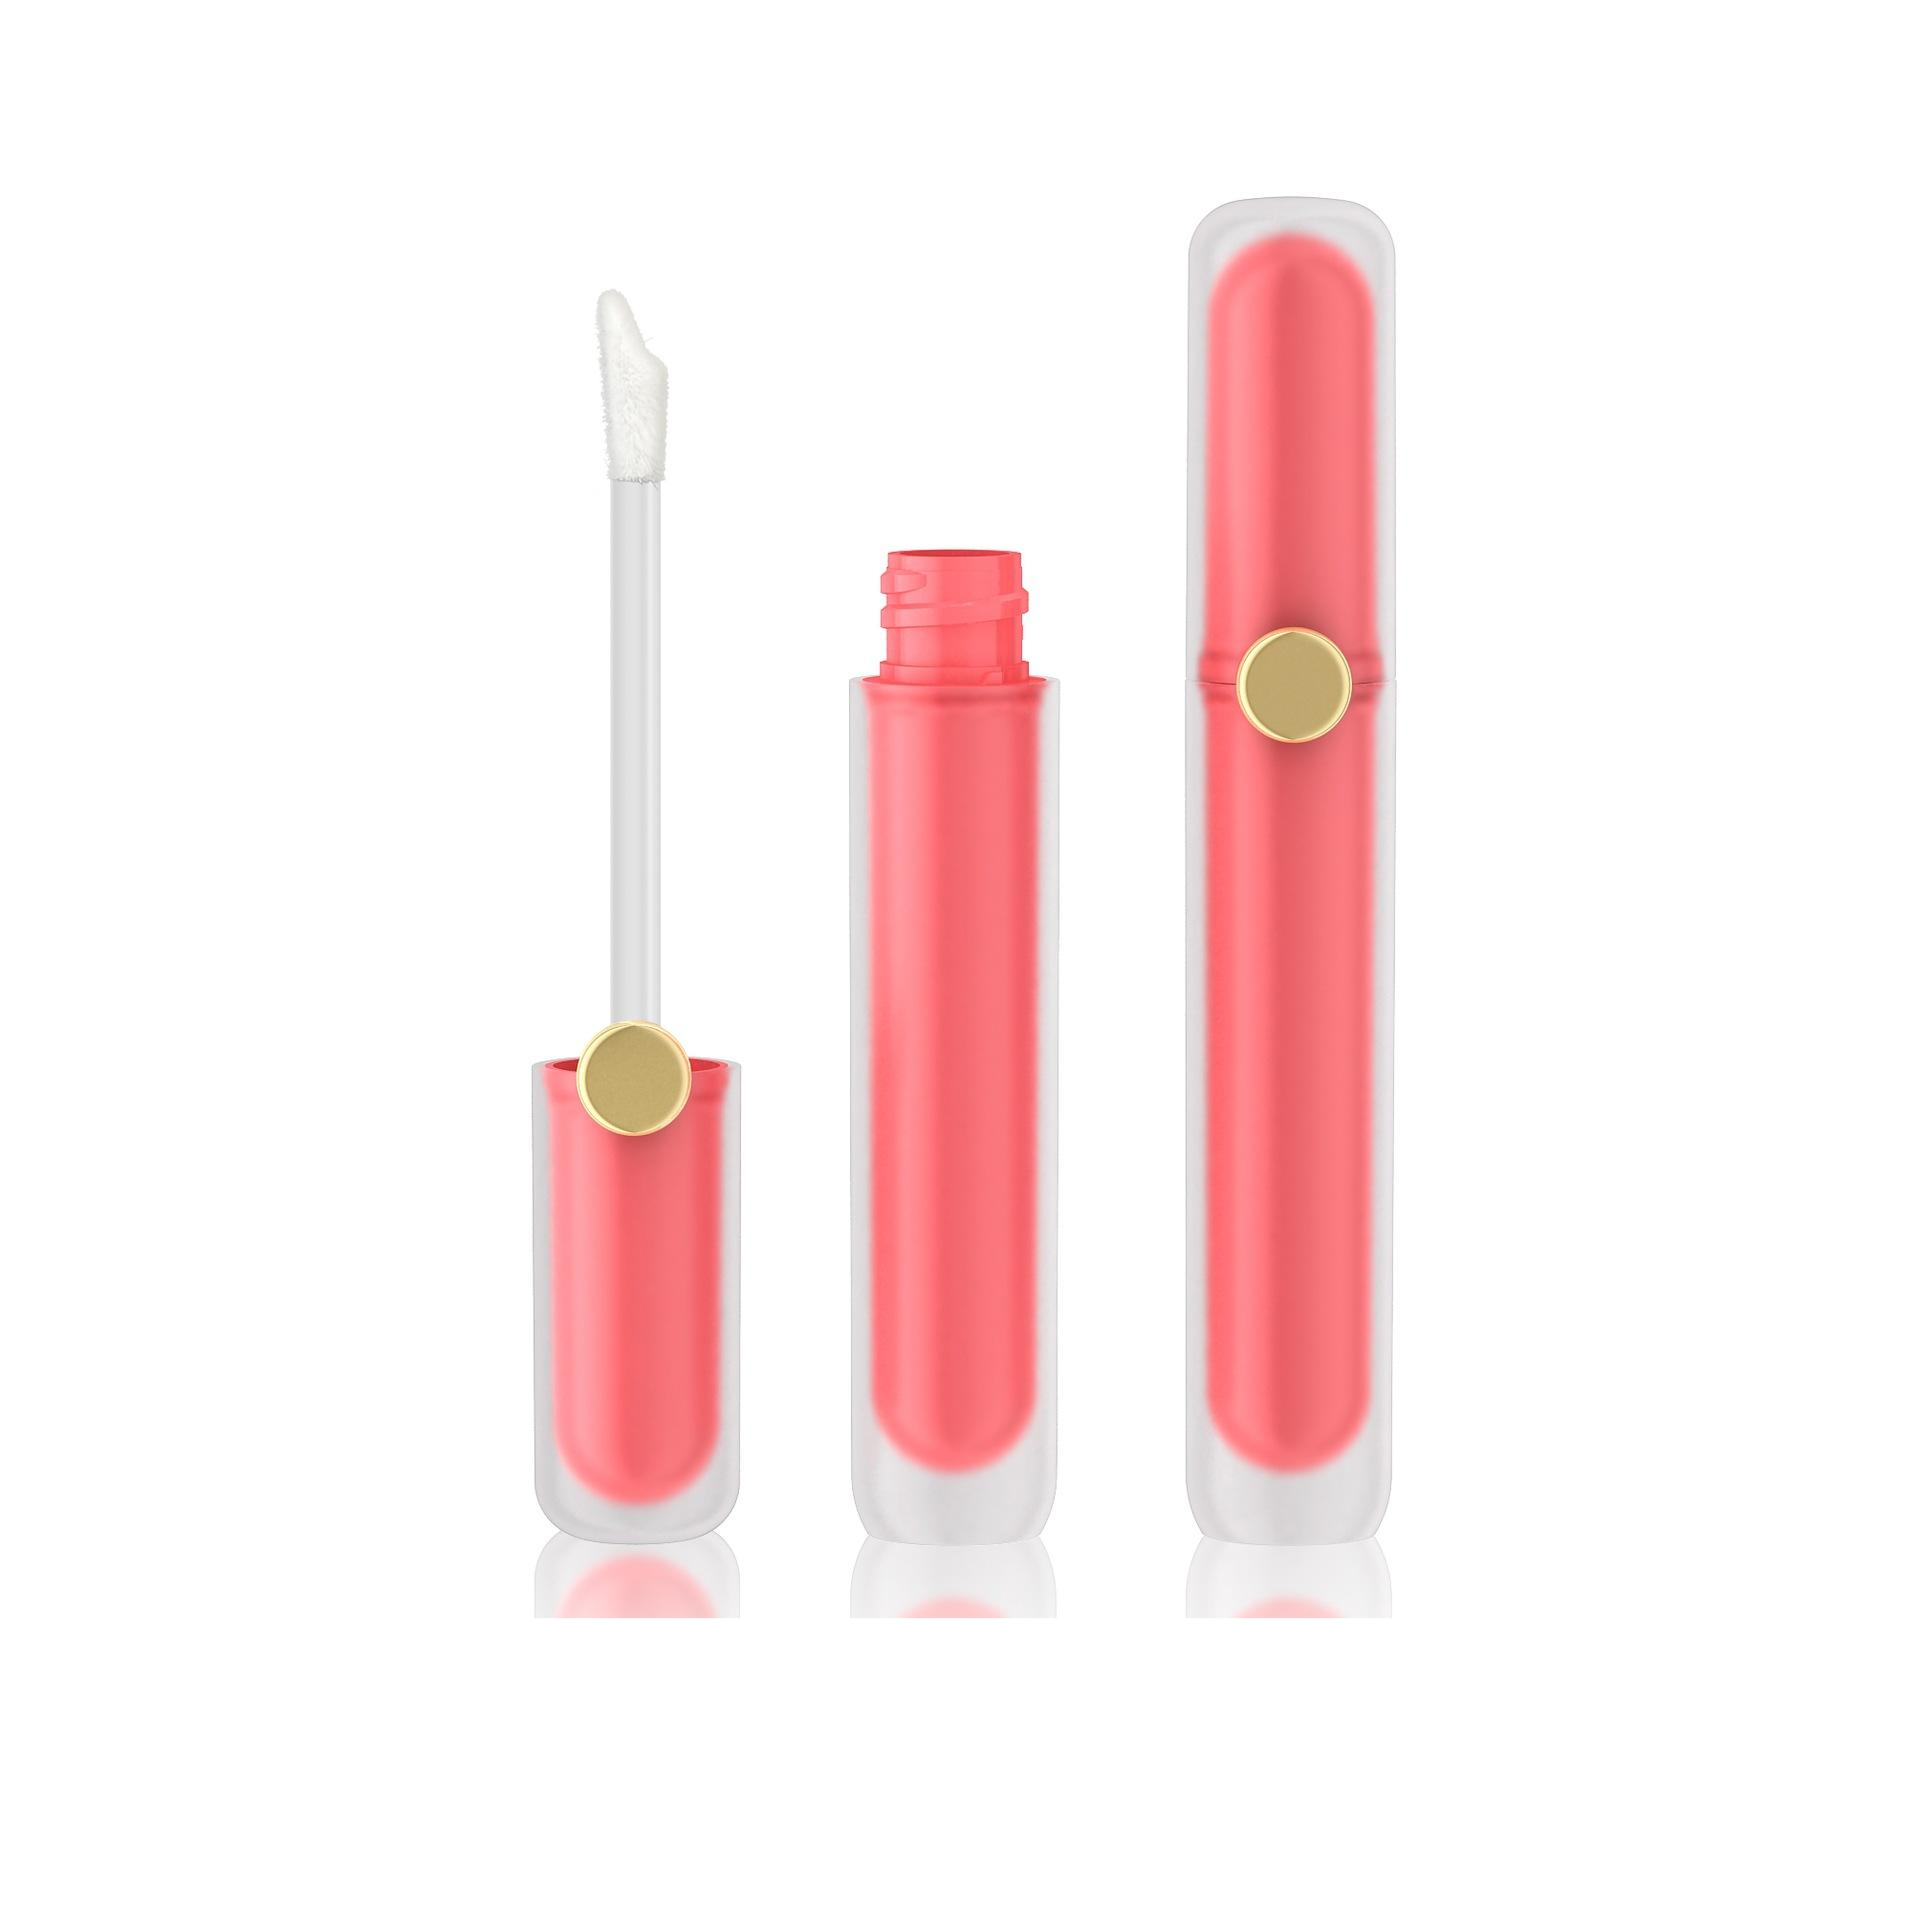 Best Price for Rose Gold Lip Gloss Containers - 6ml unique cute  Lipgloss Tube empty Lip Gloss Containers transparent liquid lipstick oval bottle  with brush tip applicator – EUGENG